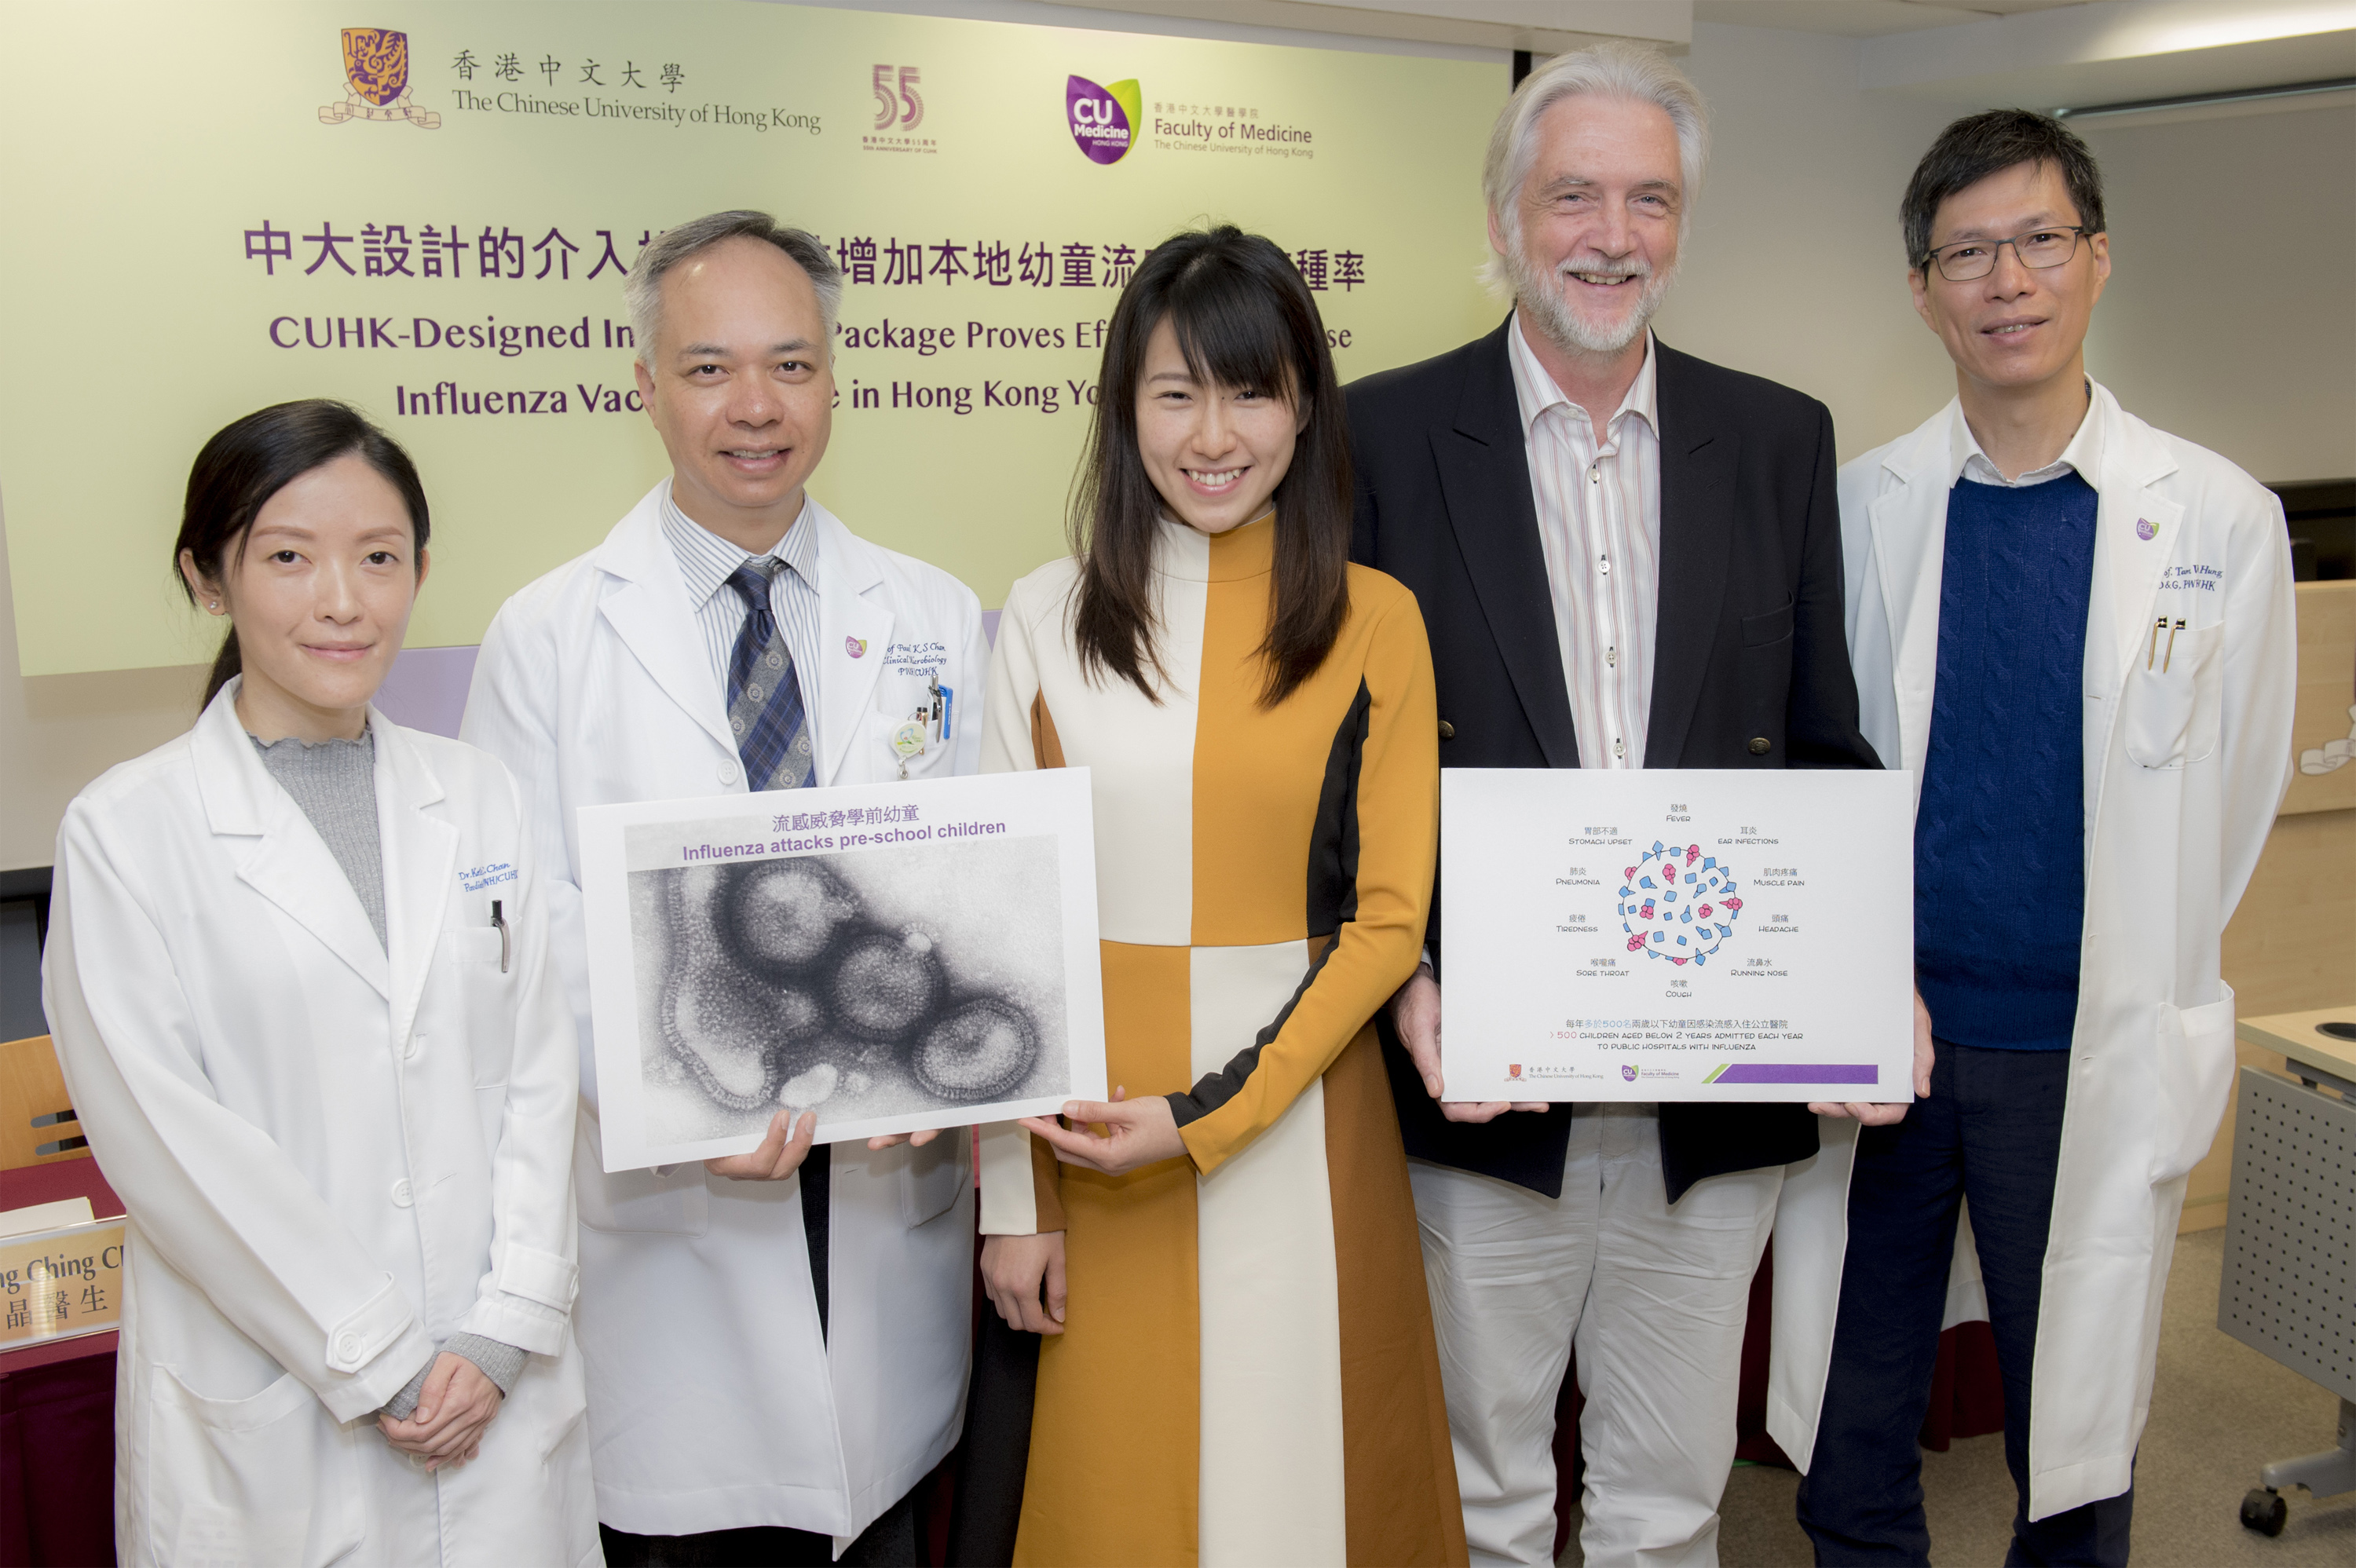 The team hopes influenza vaccine can be incorporated into Hong Kong’s routine Childhood Immunisation Programme to encourage more parents to have their children vaccinated.